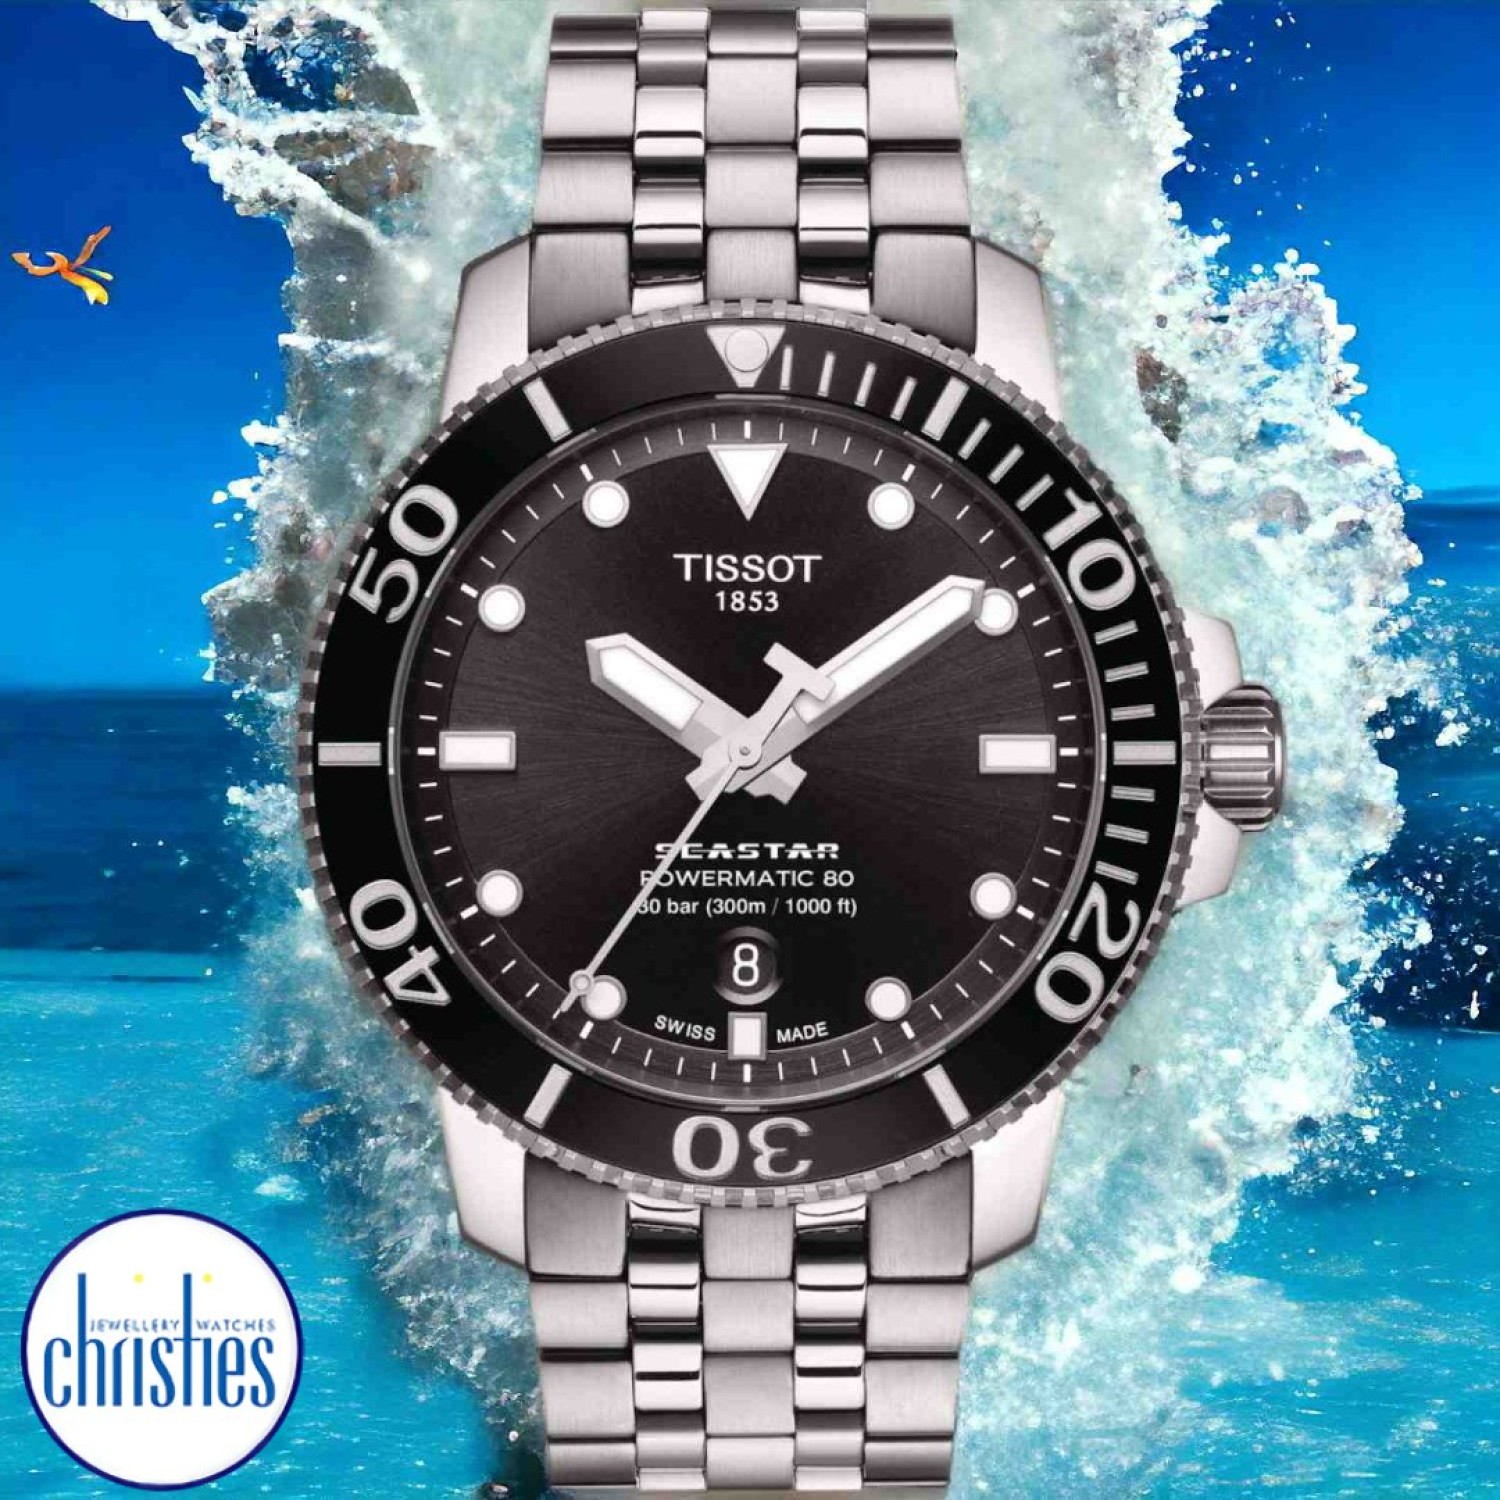 TISSOT SEASTAR 1000 Powermatic 80 T120.407.11.051.00. The Tissot Seastar 1000 merges style and performance without compromising either. The diving inspiration shapes both the appearance and the functionality of this watch. It maintains its performance to 